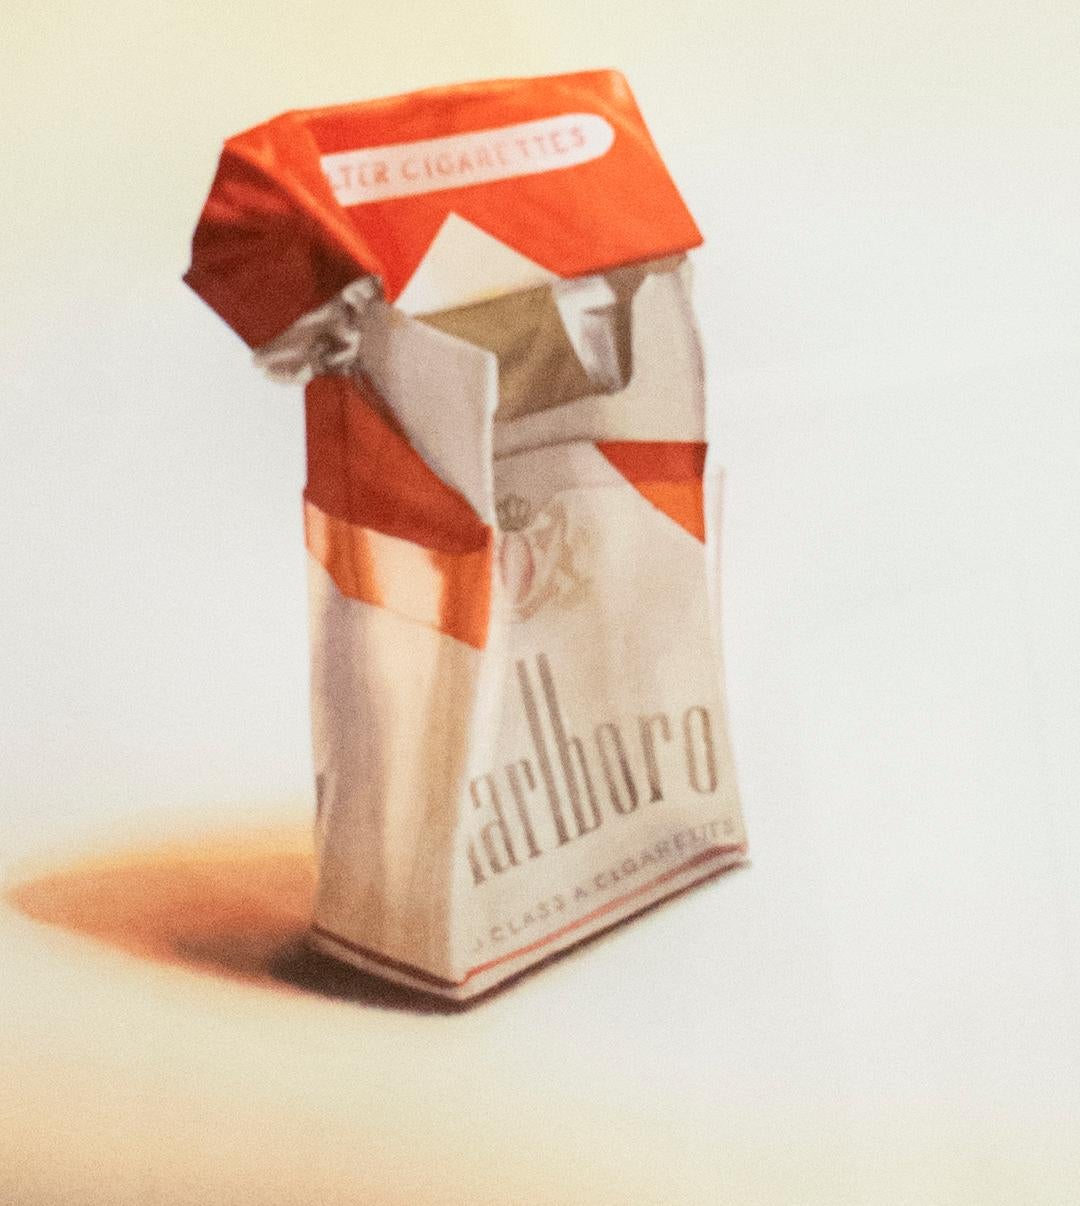 Marlboro II (Photo-Realist Pop Art Still Life Painting of a Red Cigarette Pack) - White Still-Life Painting by Scott Nelson Foster